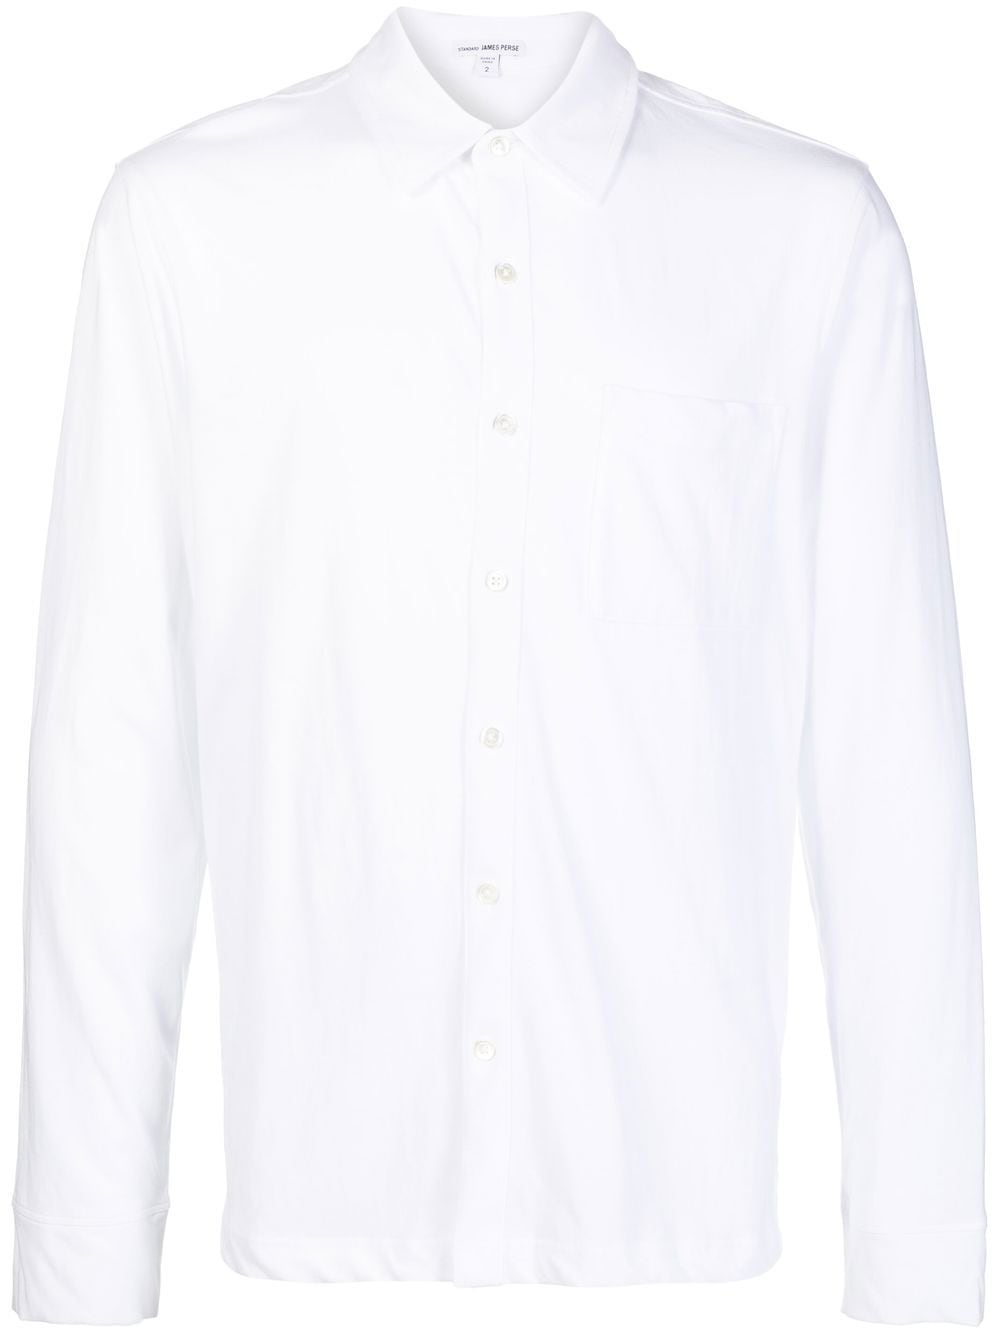 James Perse long-sleeve knit shirt - White von James Perse